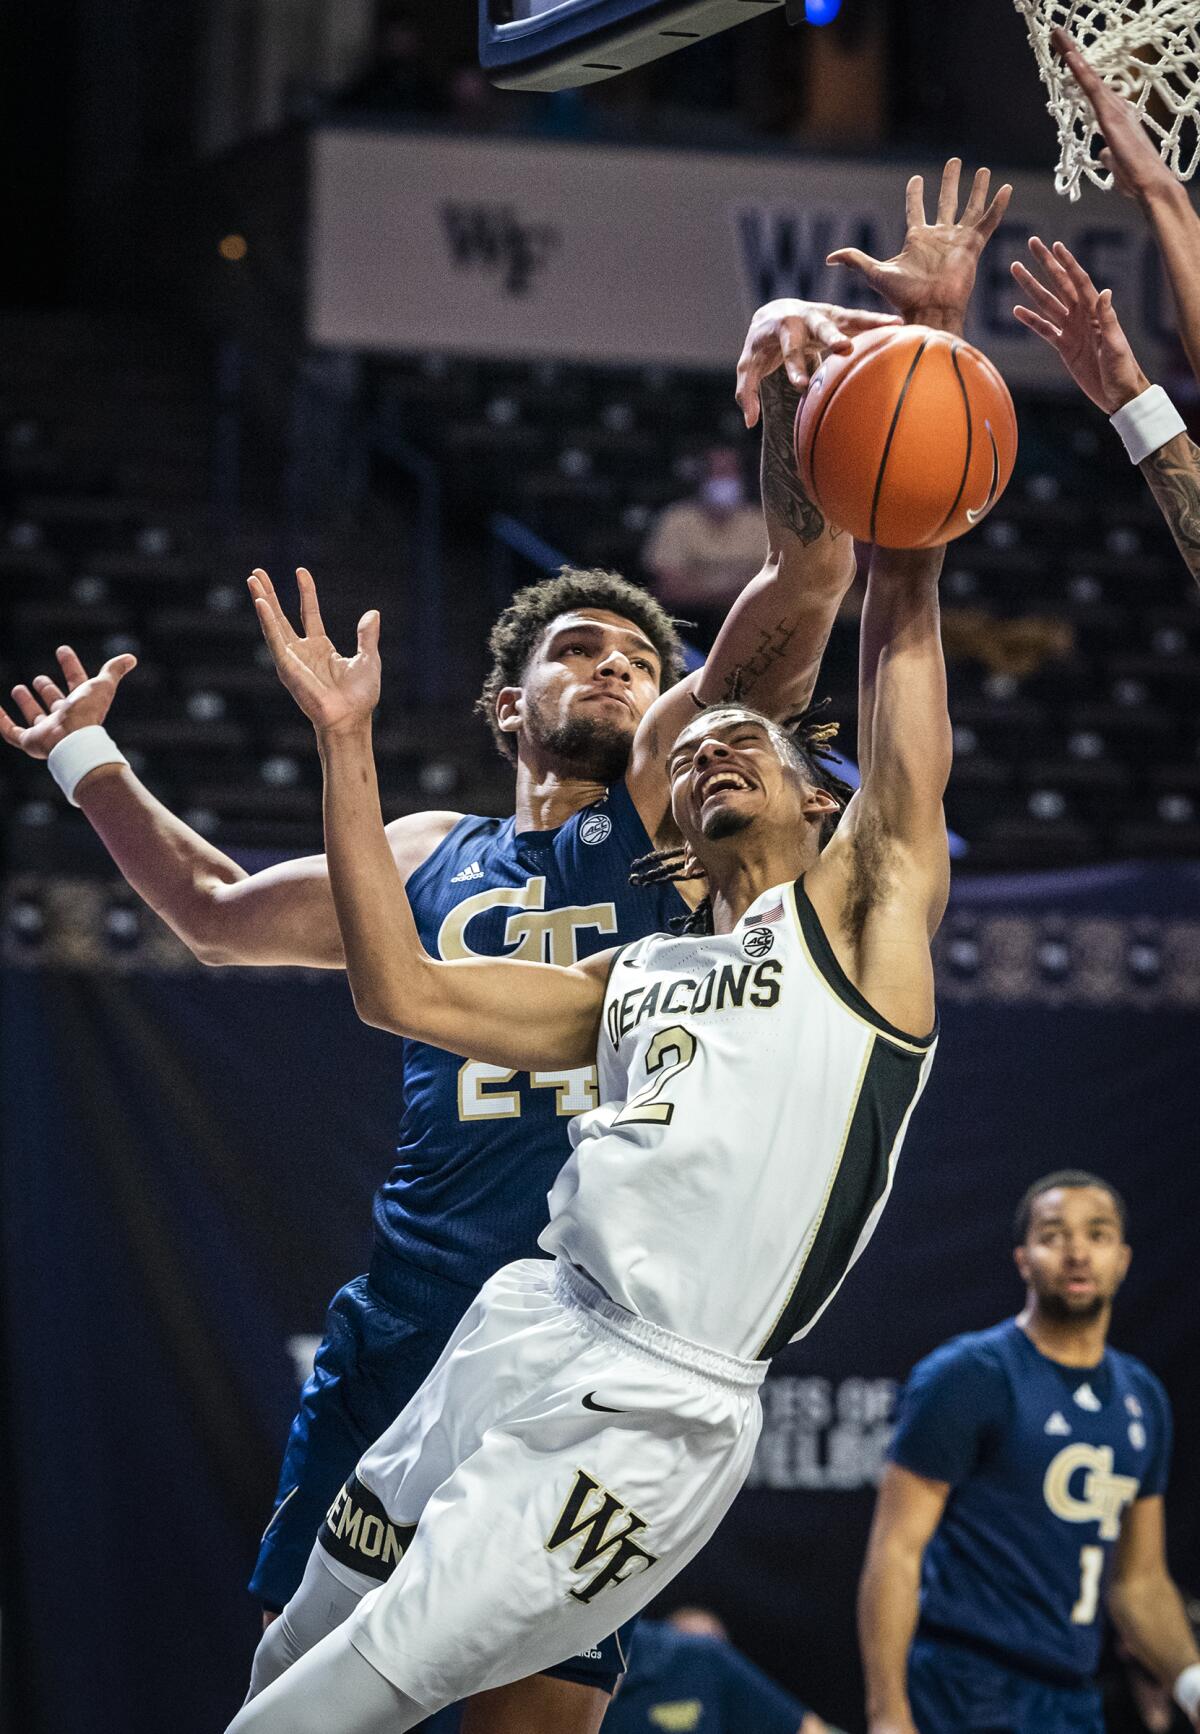 Georgia Tech forward Rodney Howard (24) blocks a shot from Wake Forest guard Jalen Johnson (2) during an NCAA college basketball game Friday, March 5, 2021, in Winston-Salem, N.C. (Andrew Dye/The Winston-Salem Journal via AP)